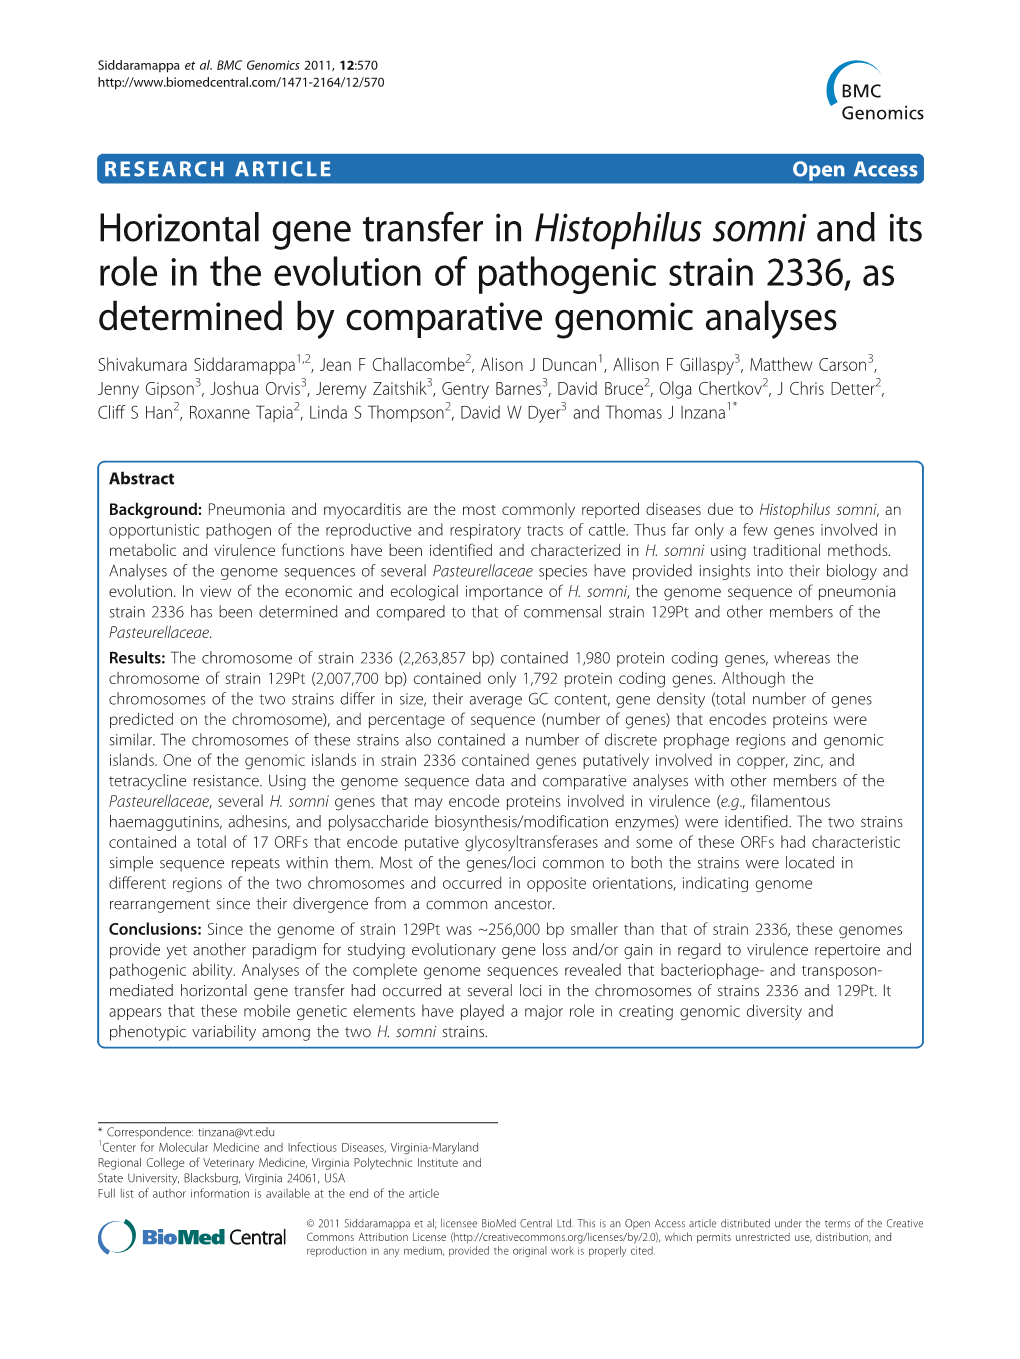 Horizontal Gene Transfer in Histophilus Somni and Its Role in the Evolution